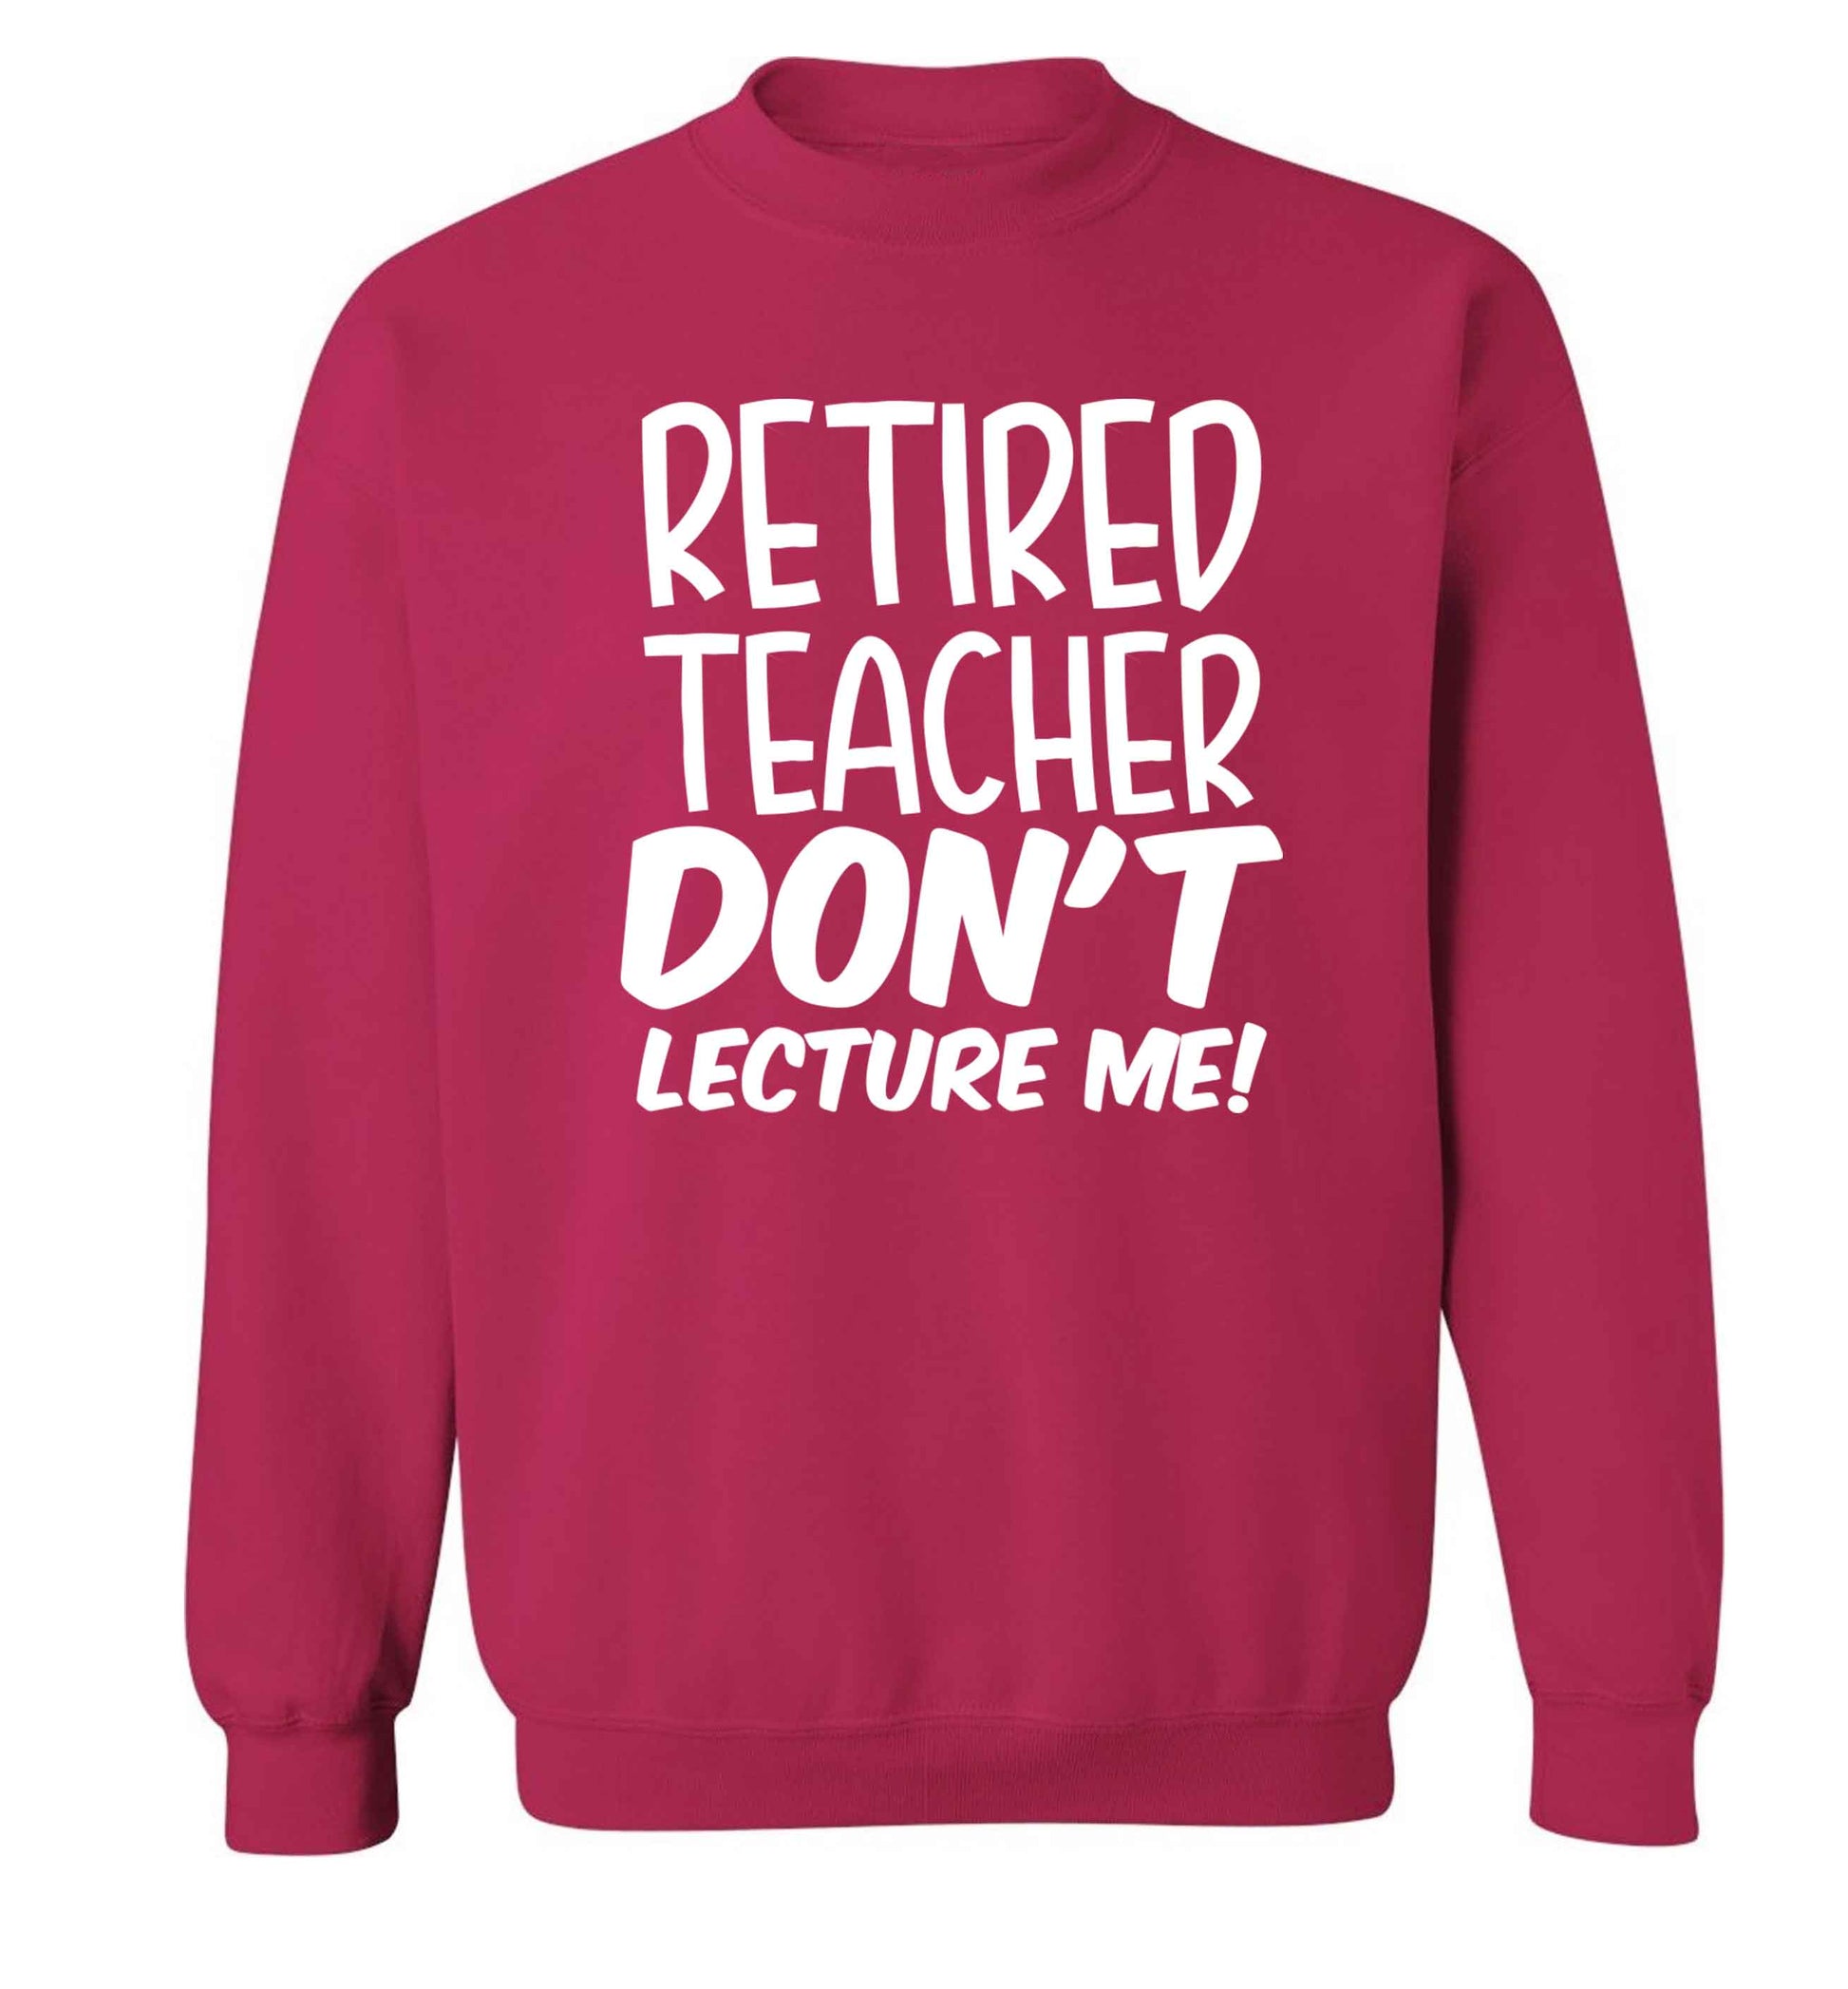 Retired teacher don't lecture me! Adult's unisex pink Sweater 2XL